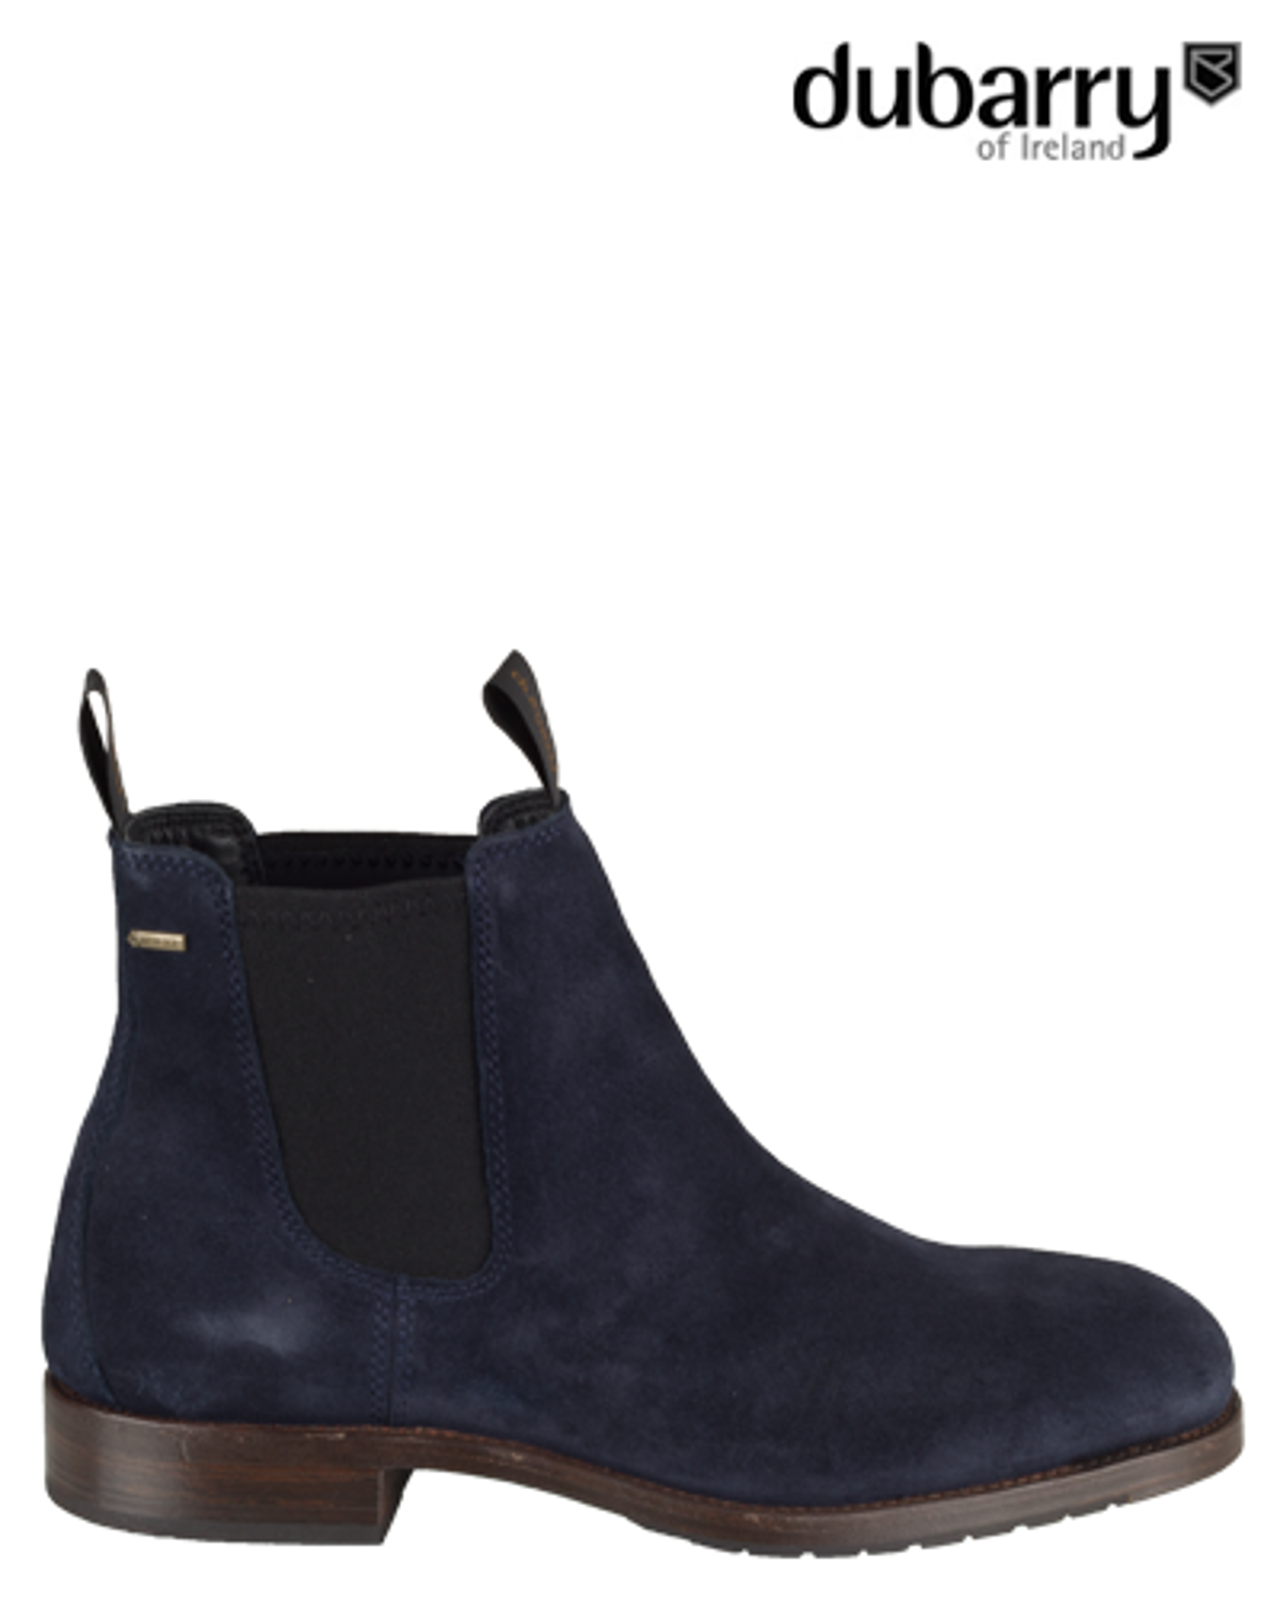 Dubarry Kerry Chelsea Boots | MONFRANCE Shoes Maastricht